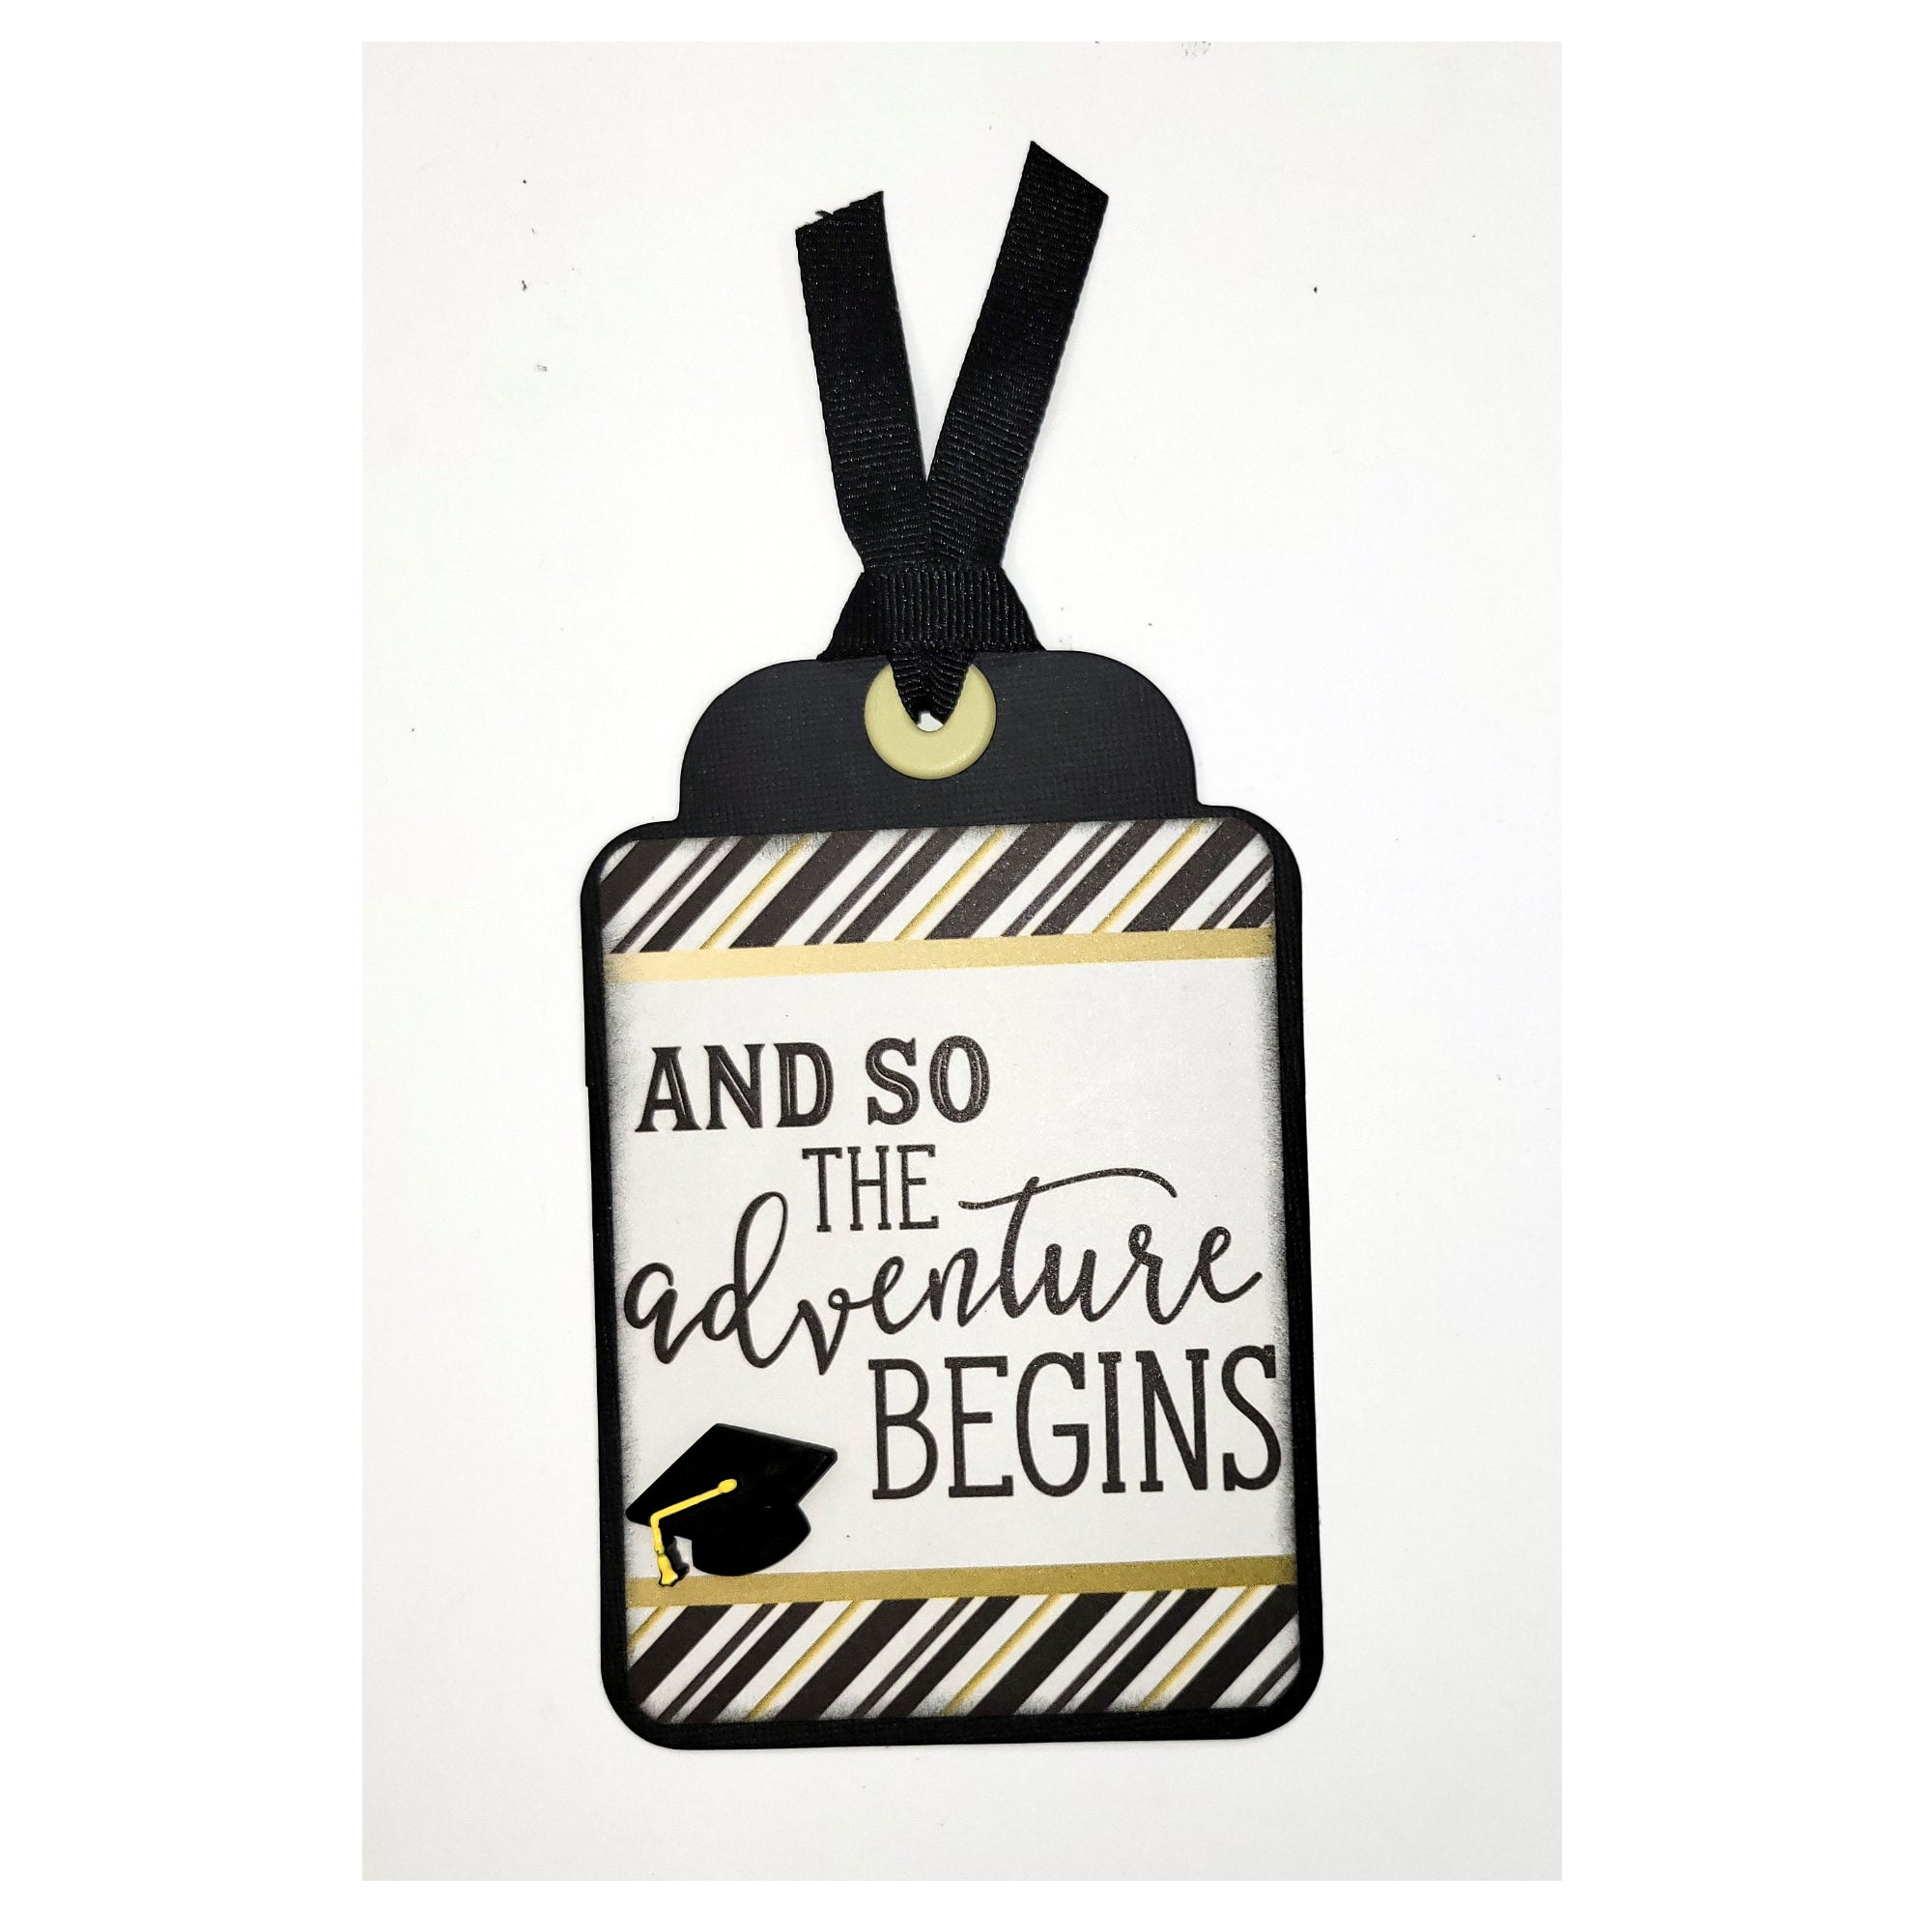 And So The Adventure Begins Tag 3 x 5 Coordinating Scrapbook Tag Embellishment by SSC Designs